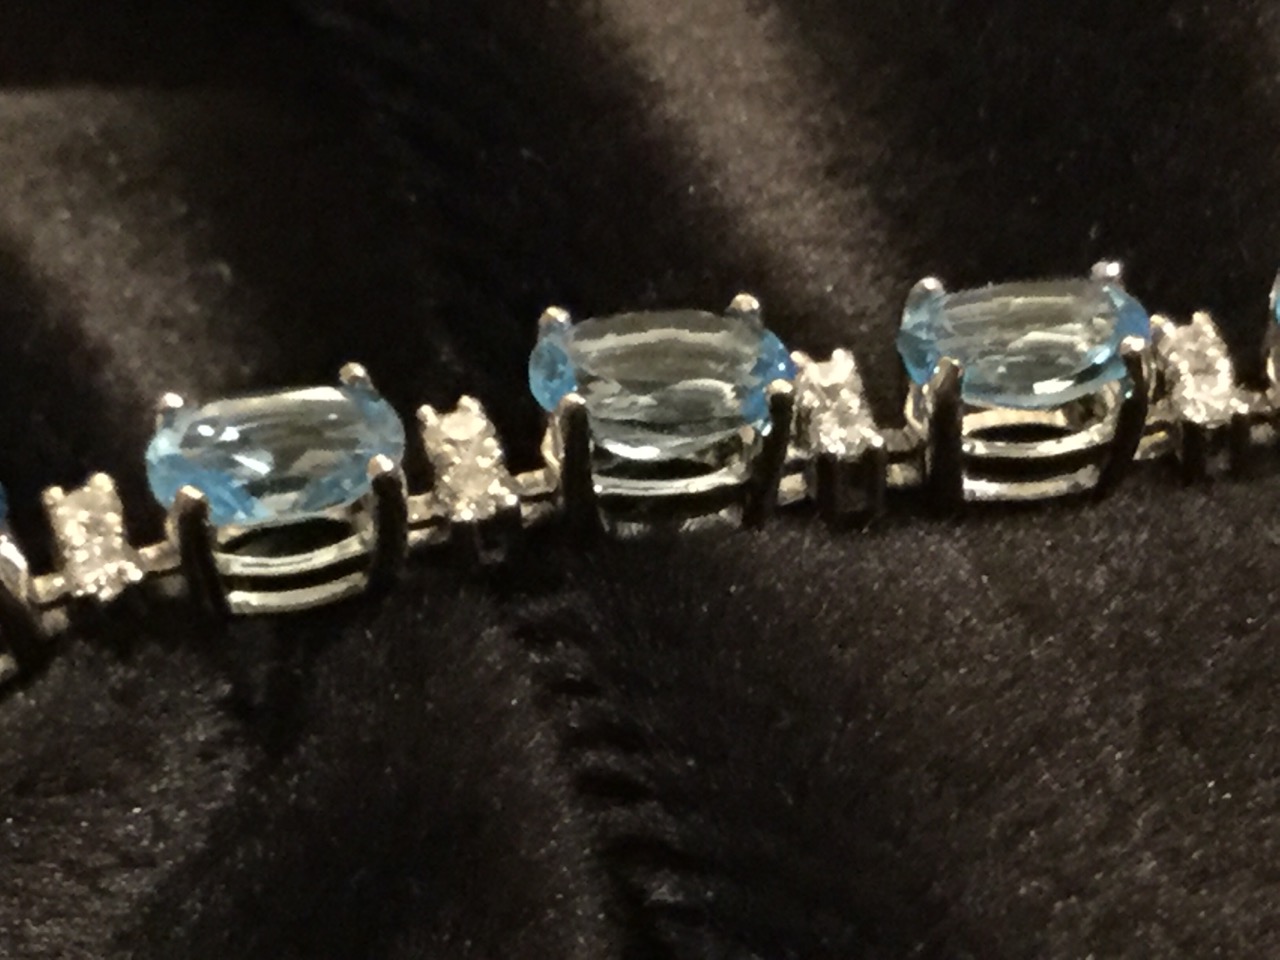 An 18ct gold blue topaz and diamond bracelet, with twenty one claw set topaz stones weighing - Image 2 of 3